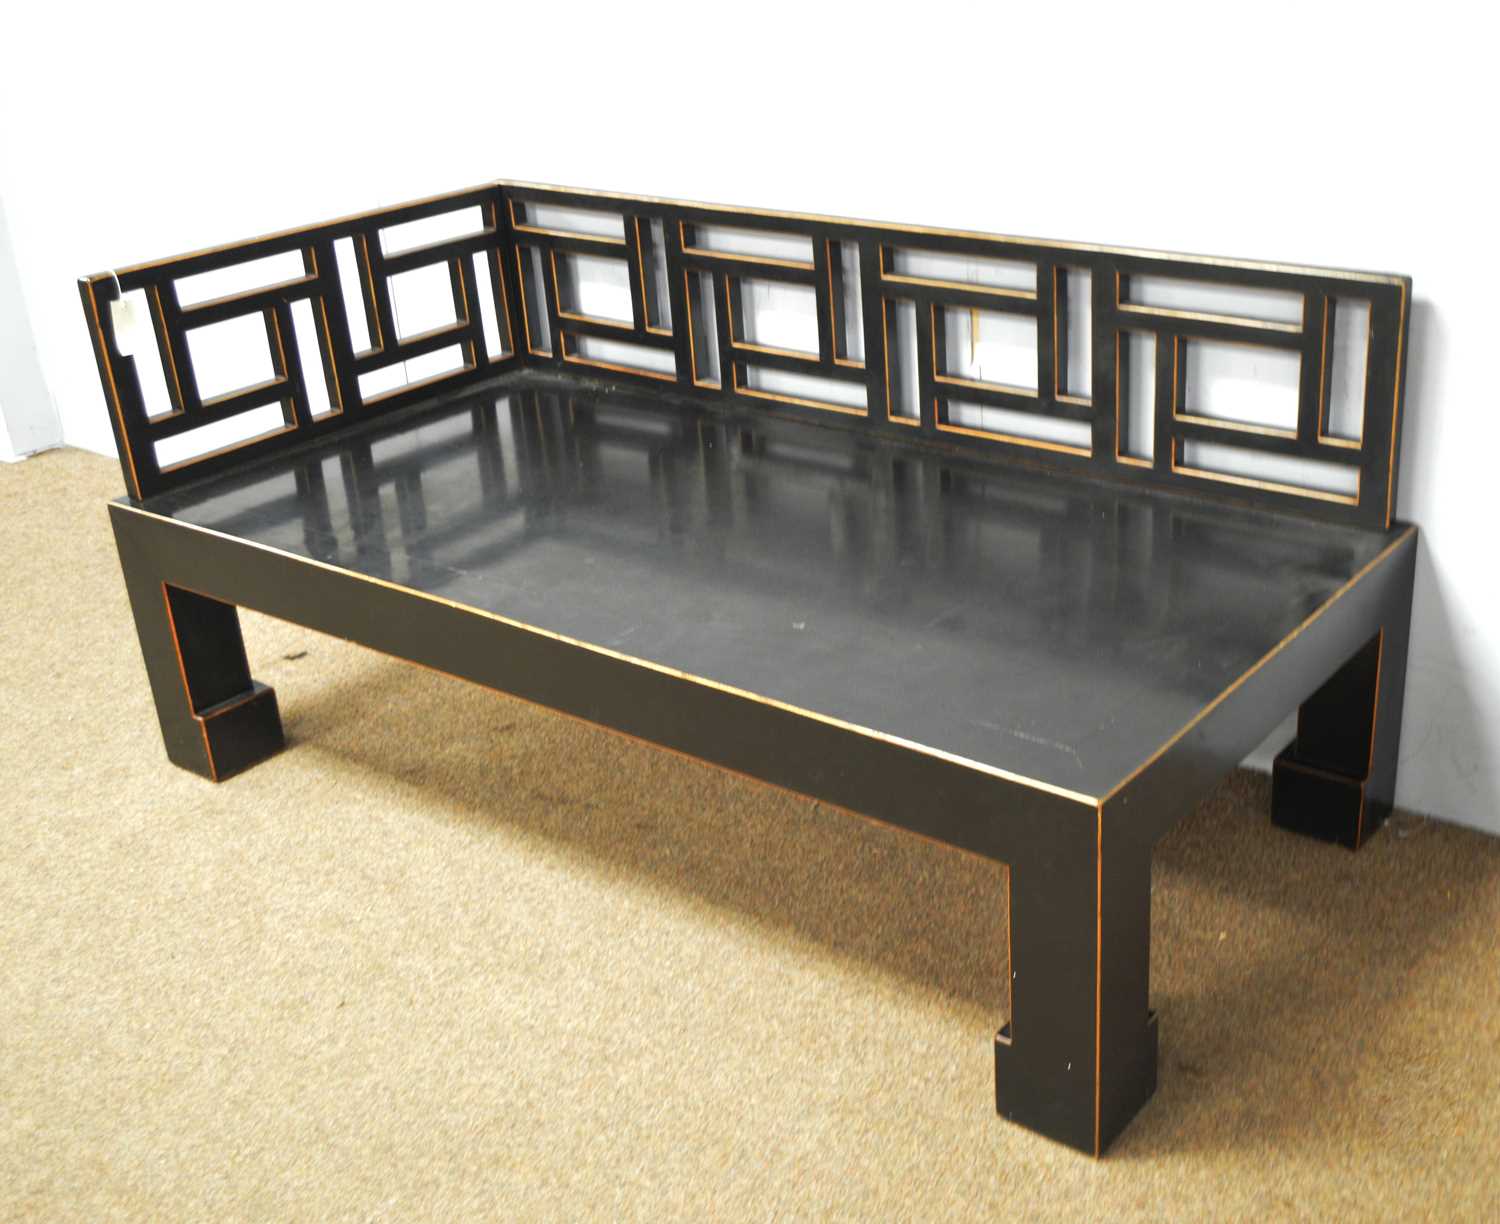 An Asian black lacquer and gold painted day bed - Image 3 of 4